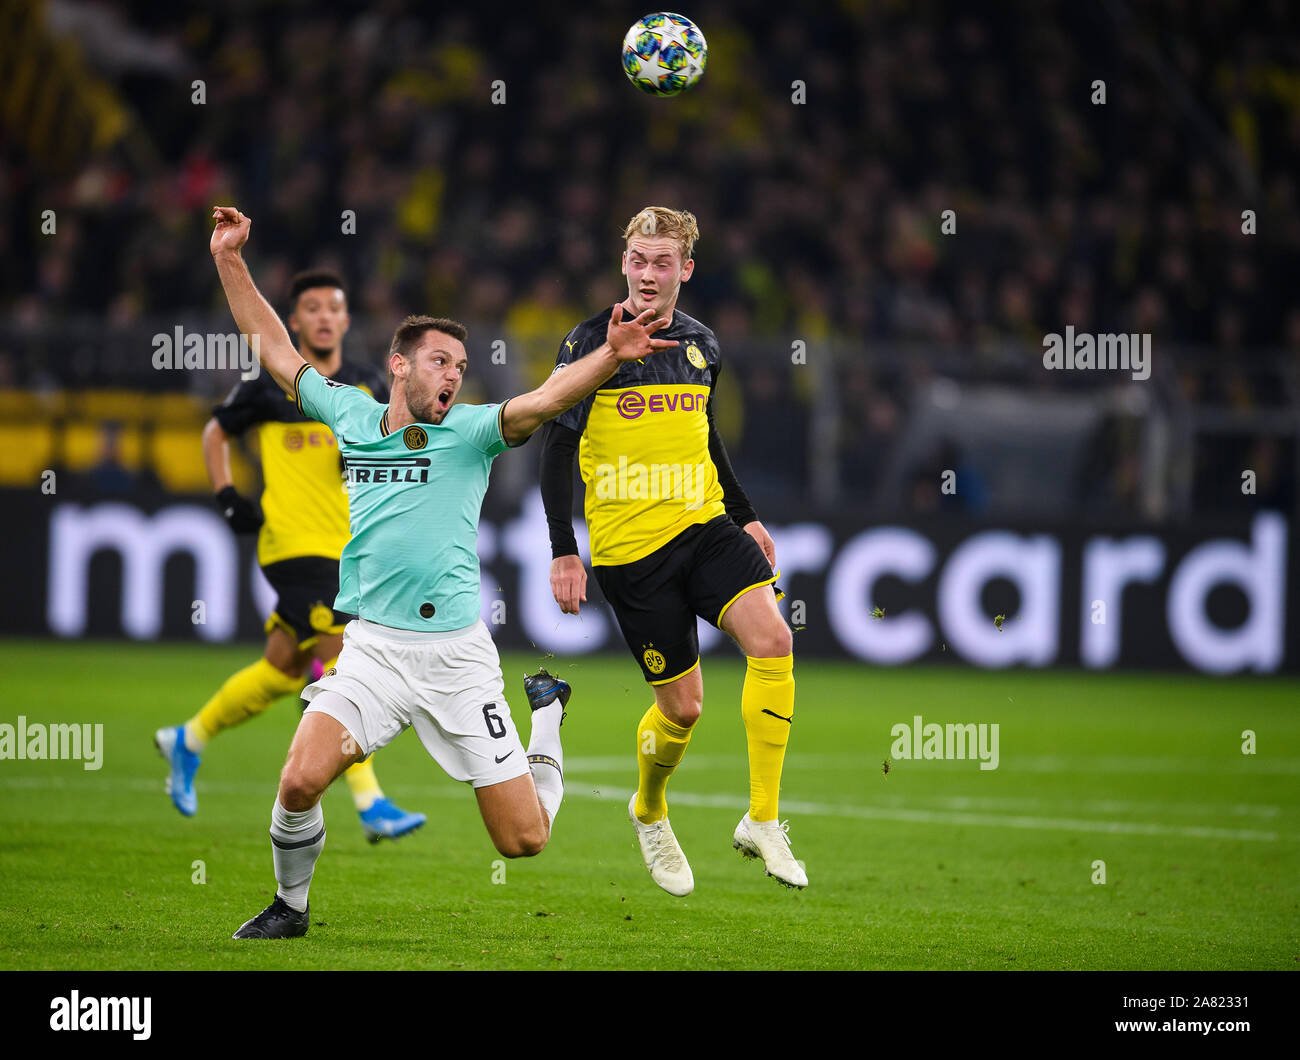 duels, duel between Stefan de Vrij (Inter Milan) and Julian Brandt (Borussia Dortmund). GES/Football/UEFA Champions League: Borussia Dortmund - Inter Milan, 05.11.2019 - Football/Soccer/UEFA Champions League: Borussia Dortmund vs. Inter Milan, Dortmund, Nov 05, 2019 - DFL regulations prohibit any use of photographs as image sequences and/or quasi-video. | usage worldwide Stock Photo